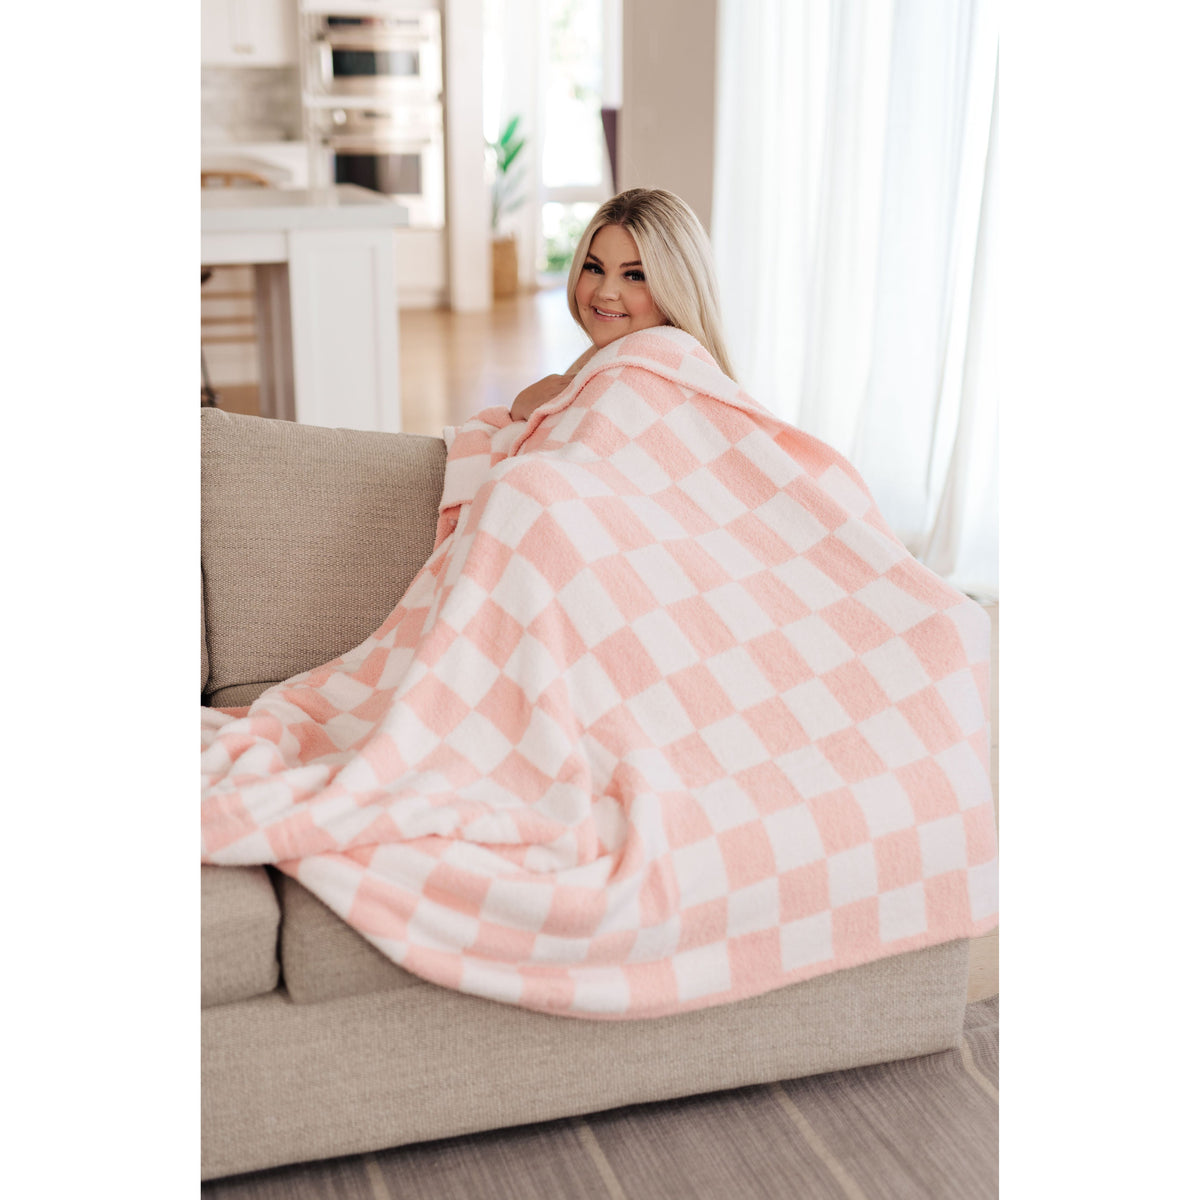 Cuddle Culture | Penny Blanket Single Cuddle Size in Pink Check